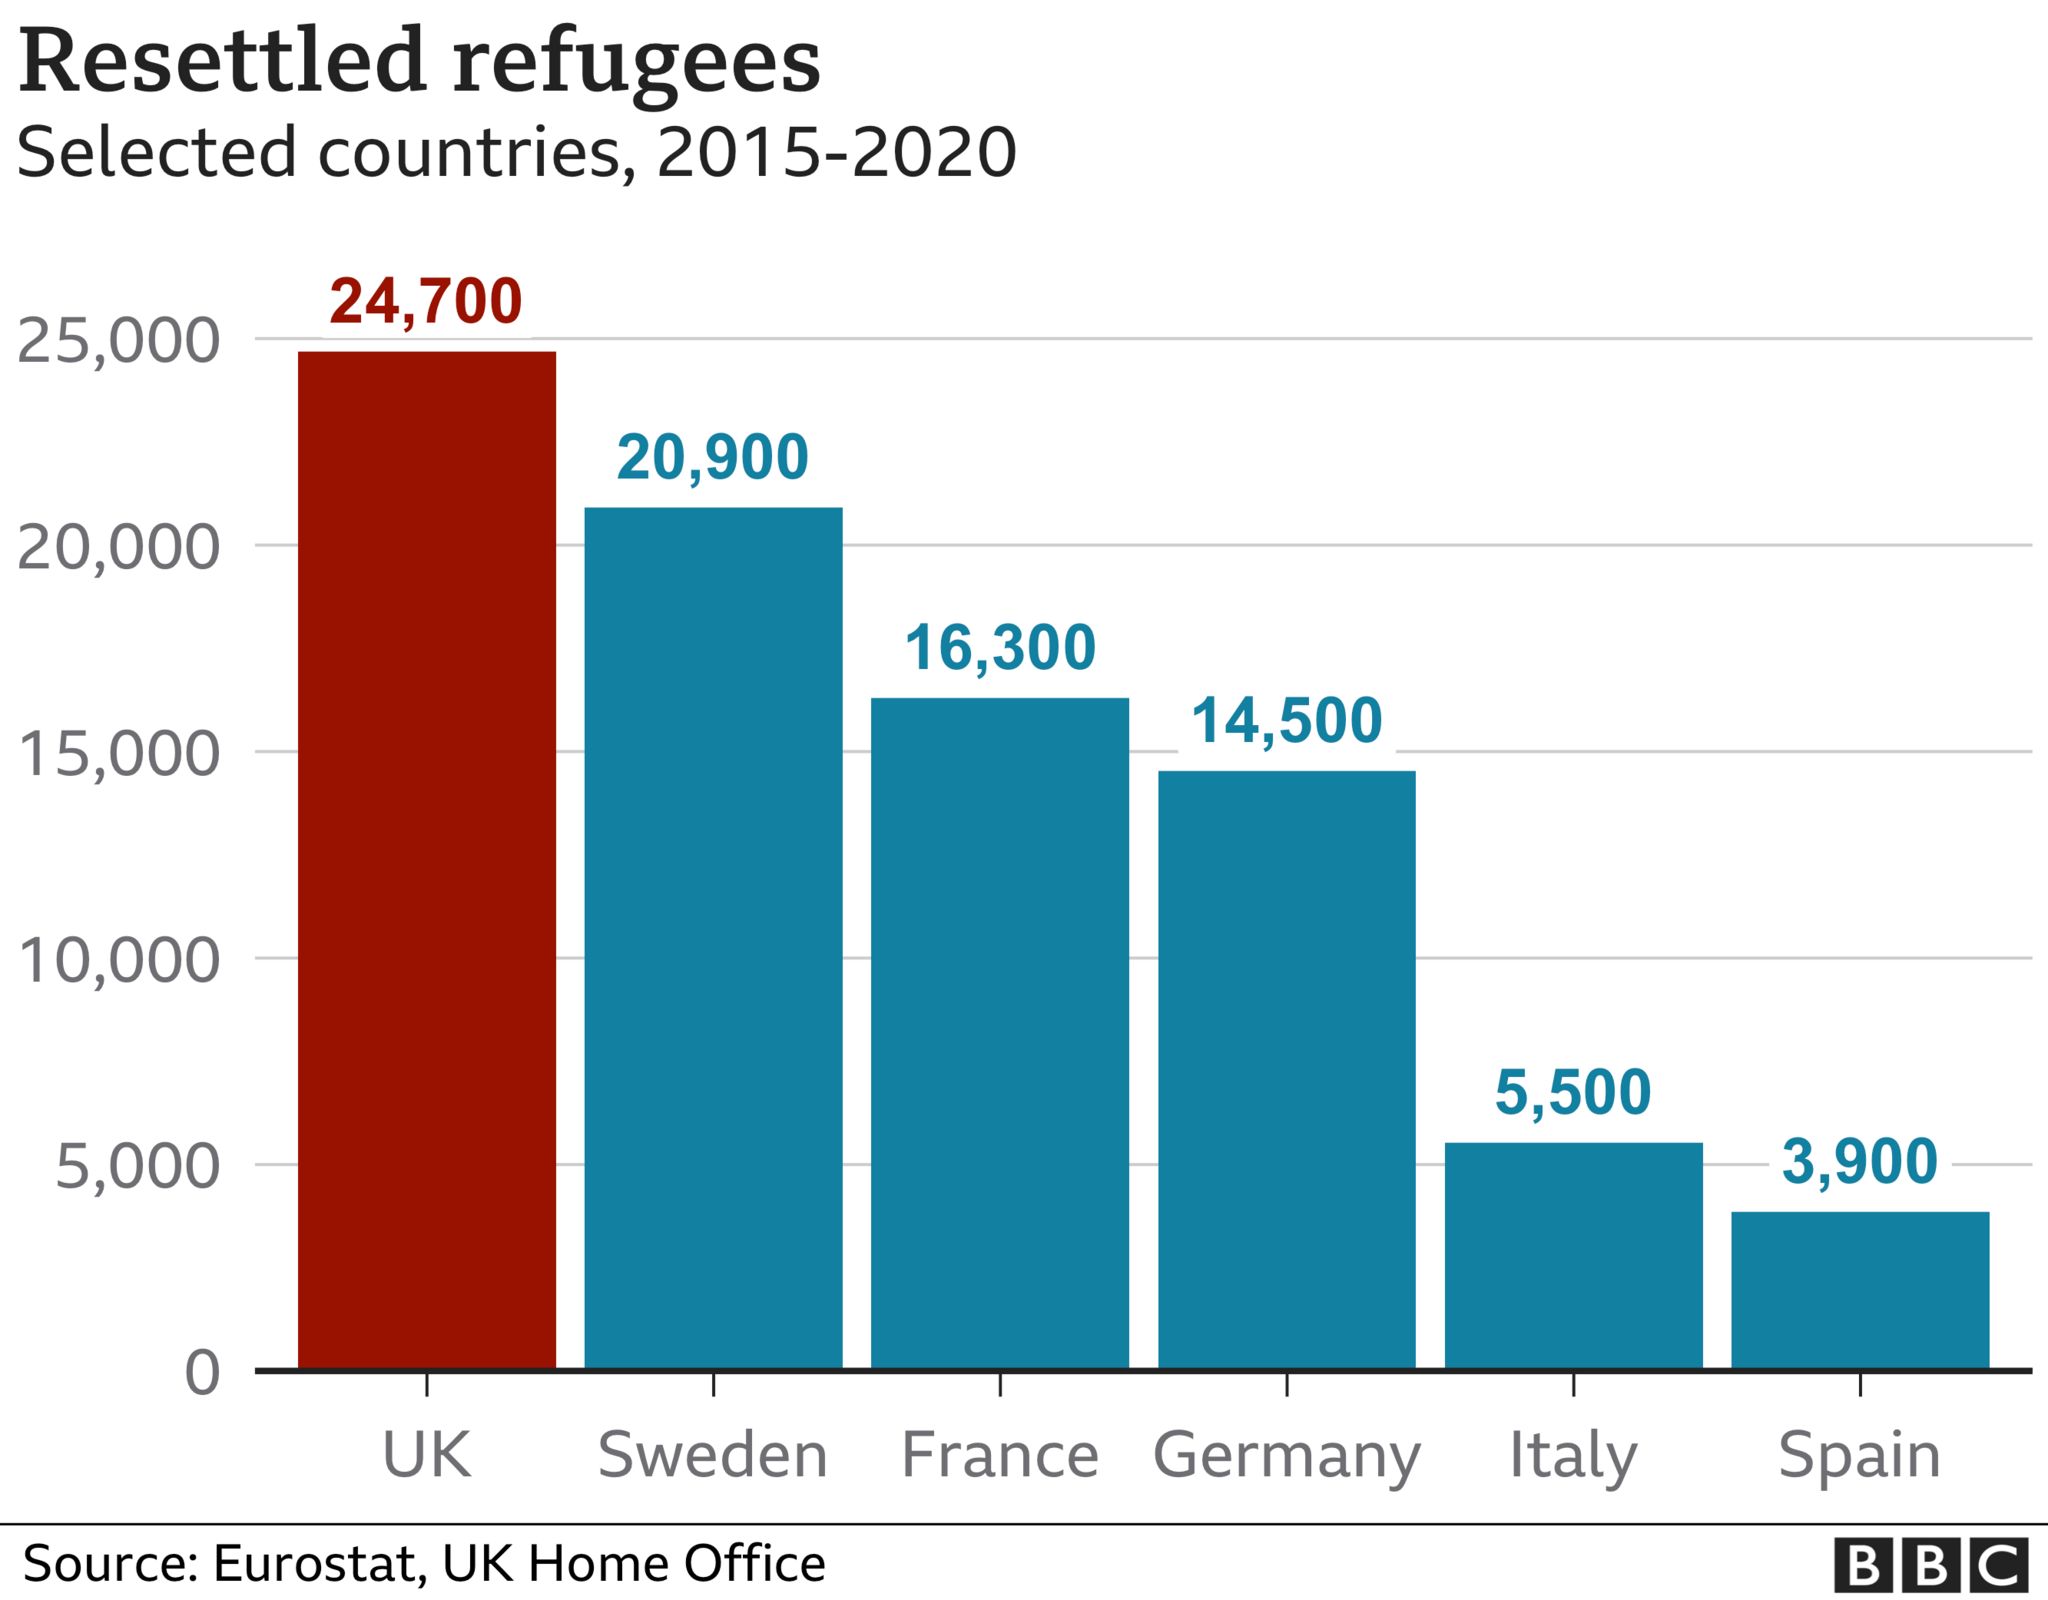 Chart showing the number of resettled refugees 2015-2020 for Germany, UK, Sweden, France, Italy and Spain